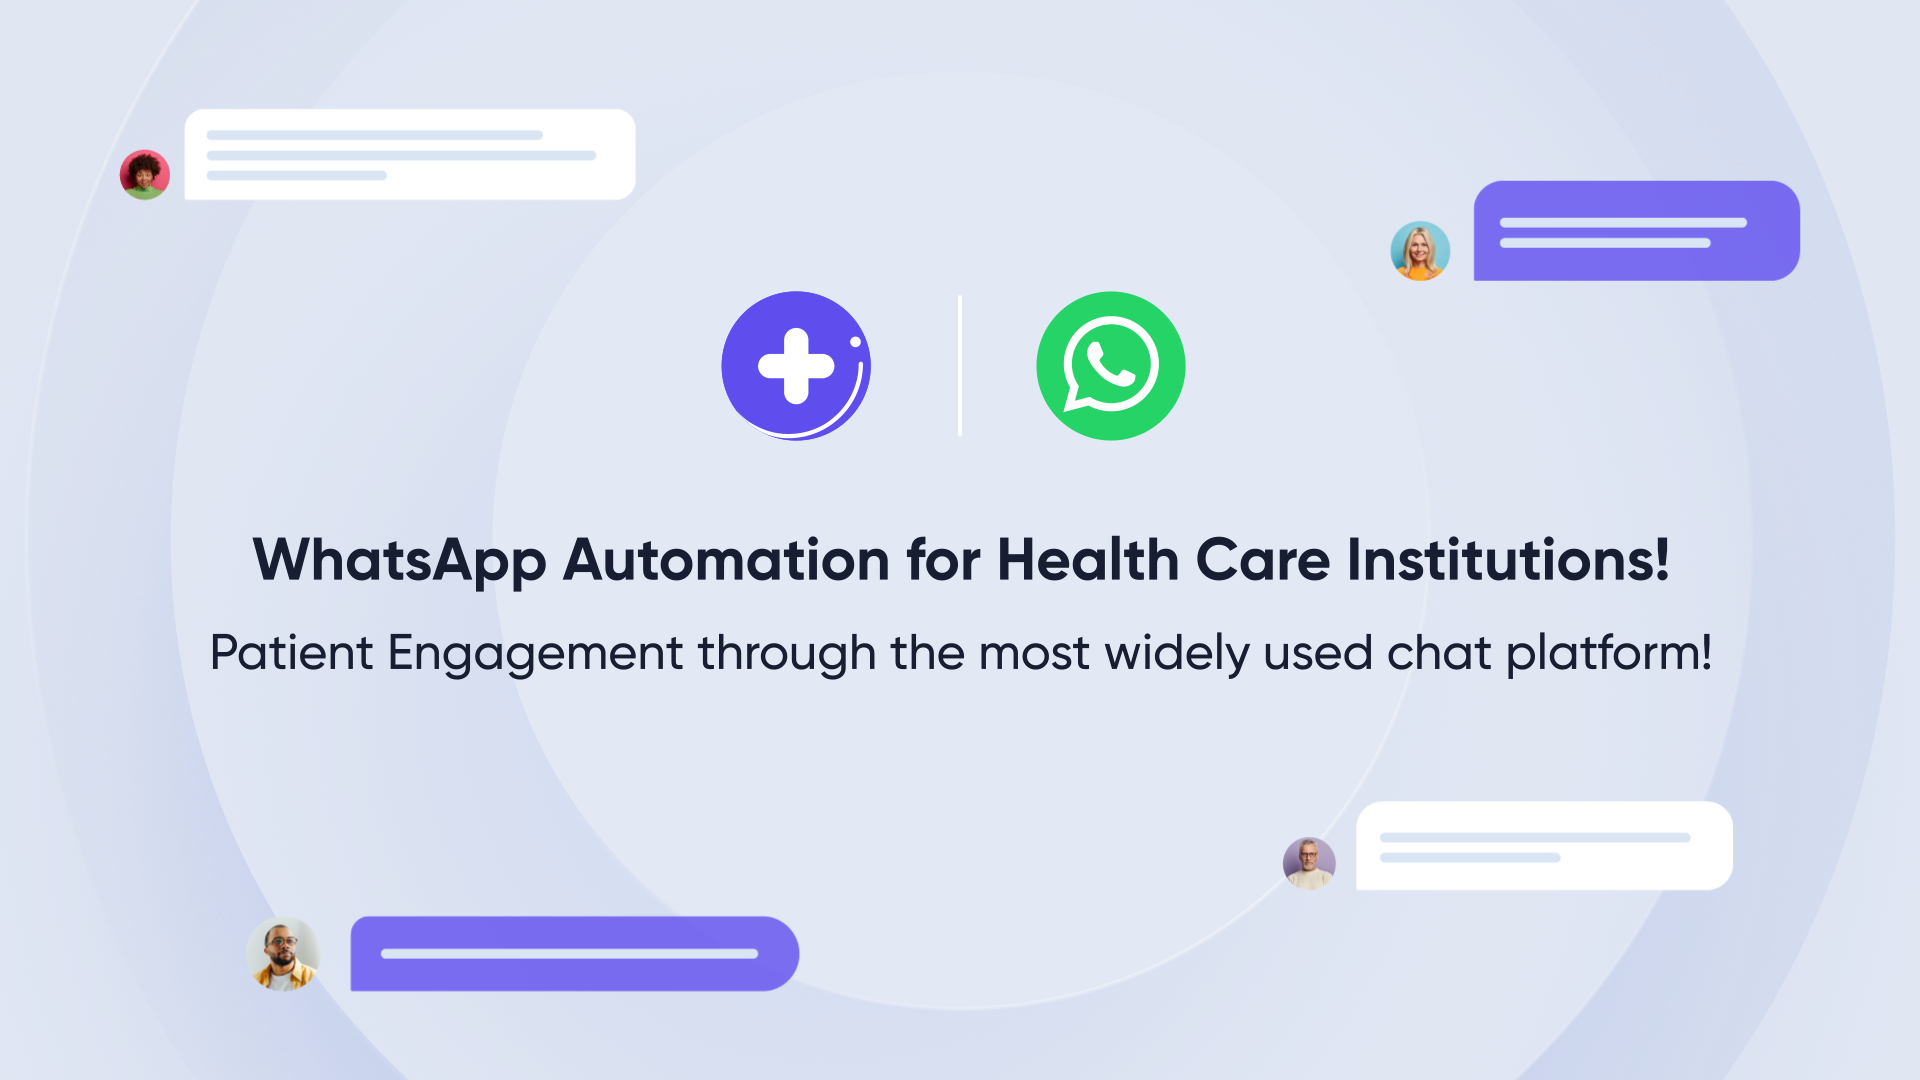 WhatsApp automation for Healthcare institutions.